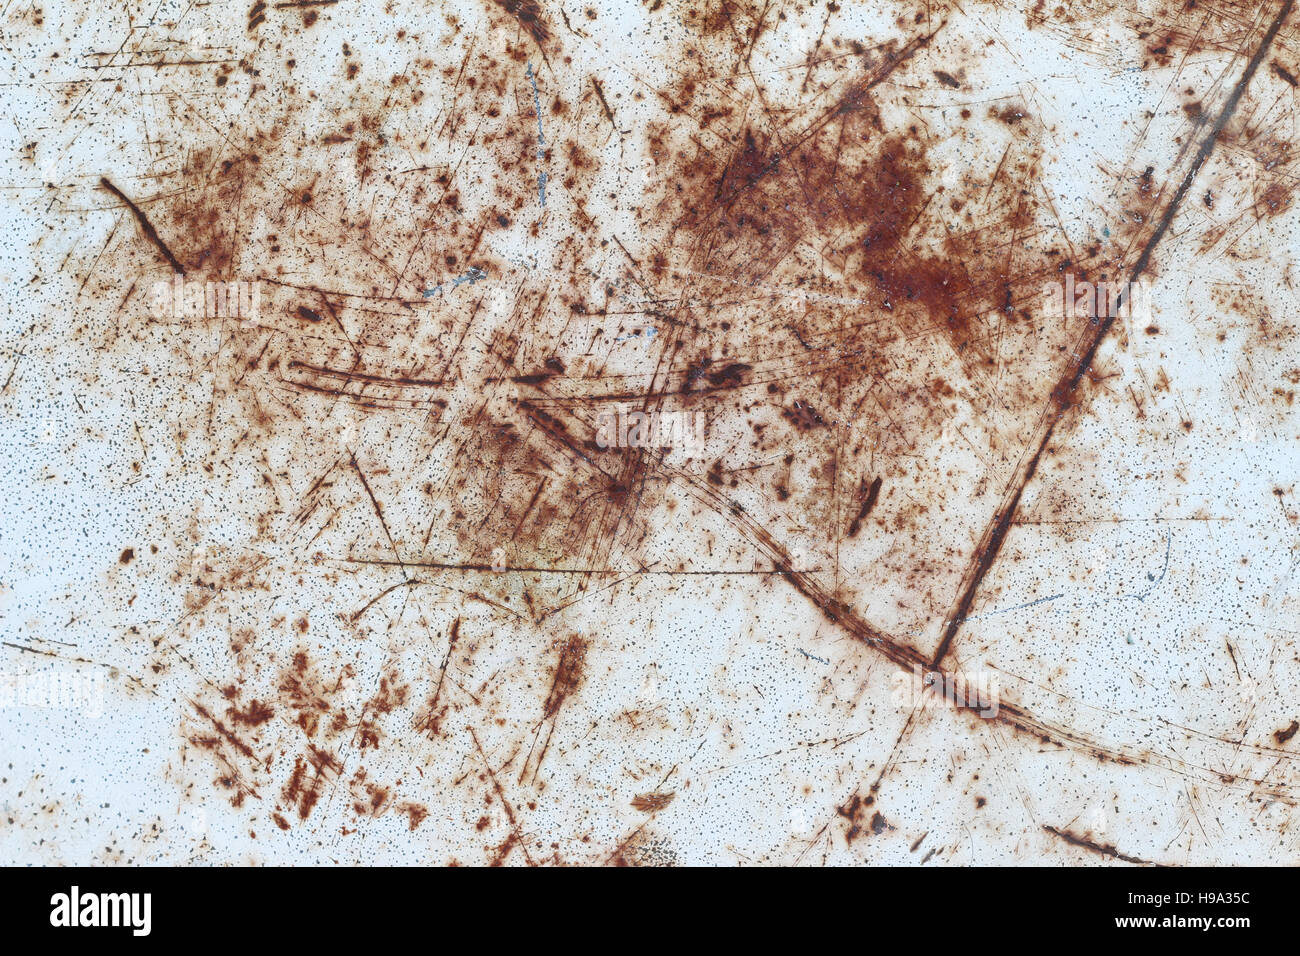 Scratches on the surface of the rusted metal plate Stock Photo